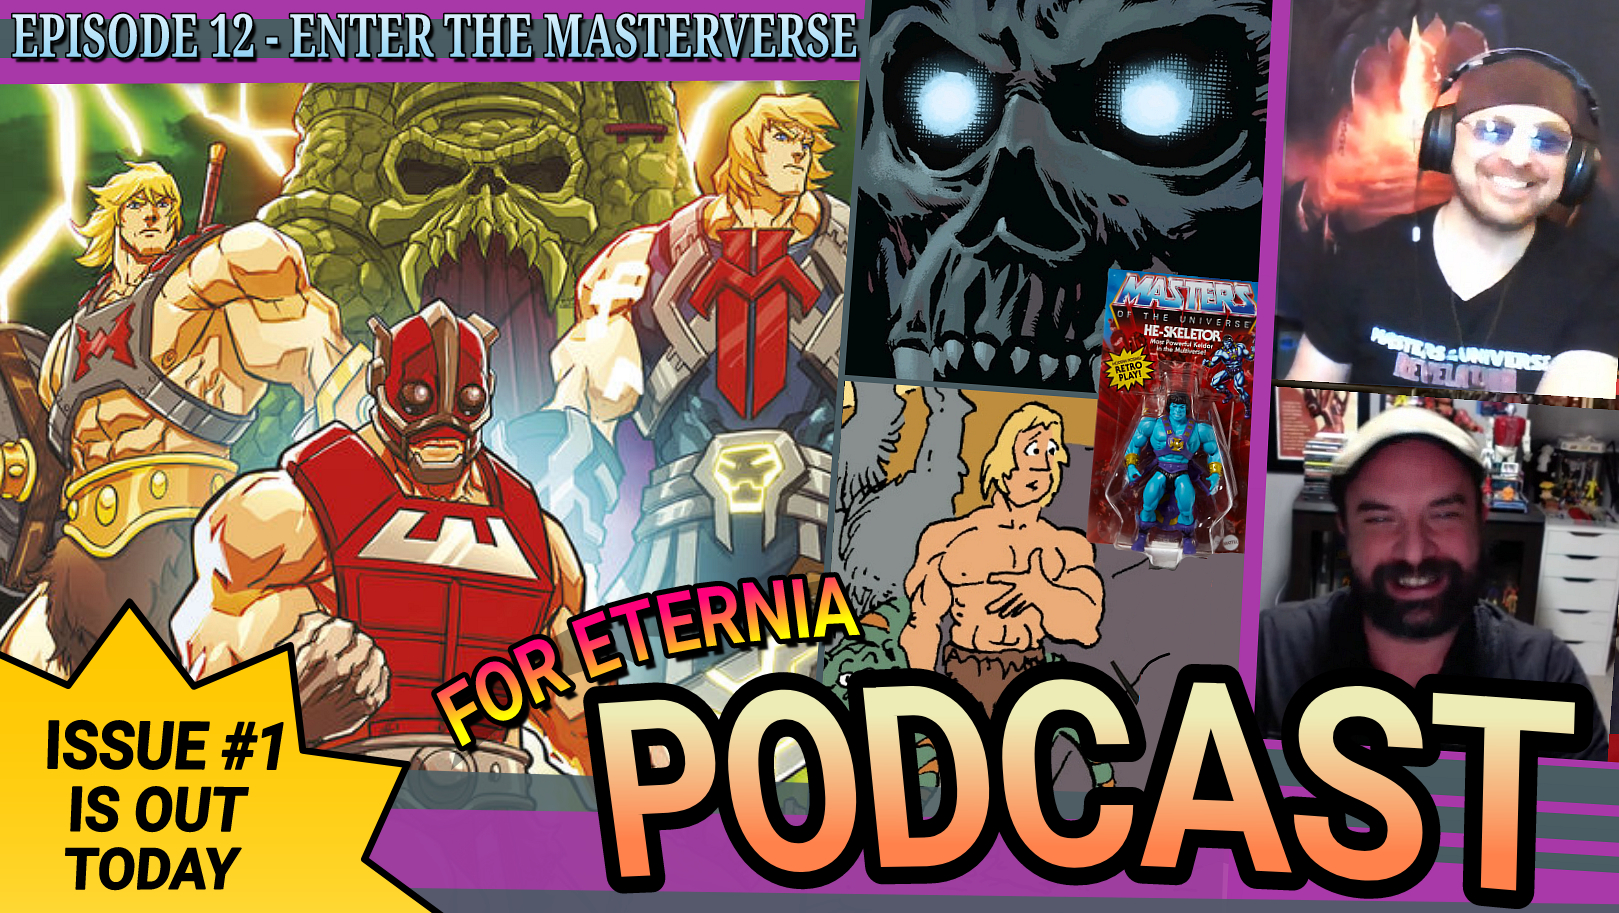 ENTER THE MASTERVERSE! Talking Masterverse Comics, Figures and Issue #1 with writer Tim Seeley!